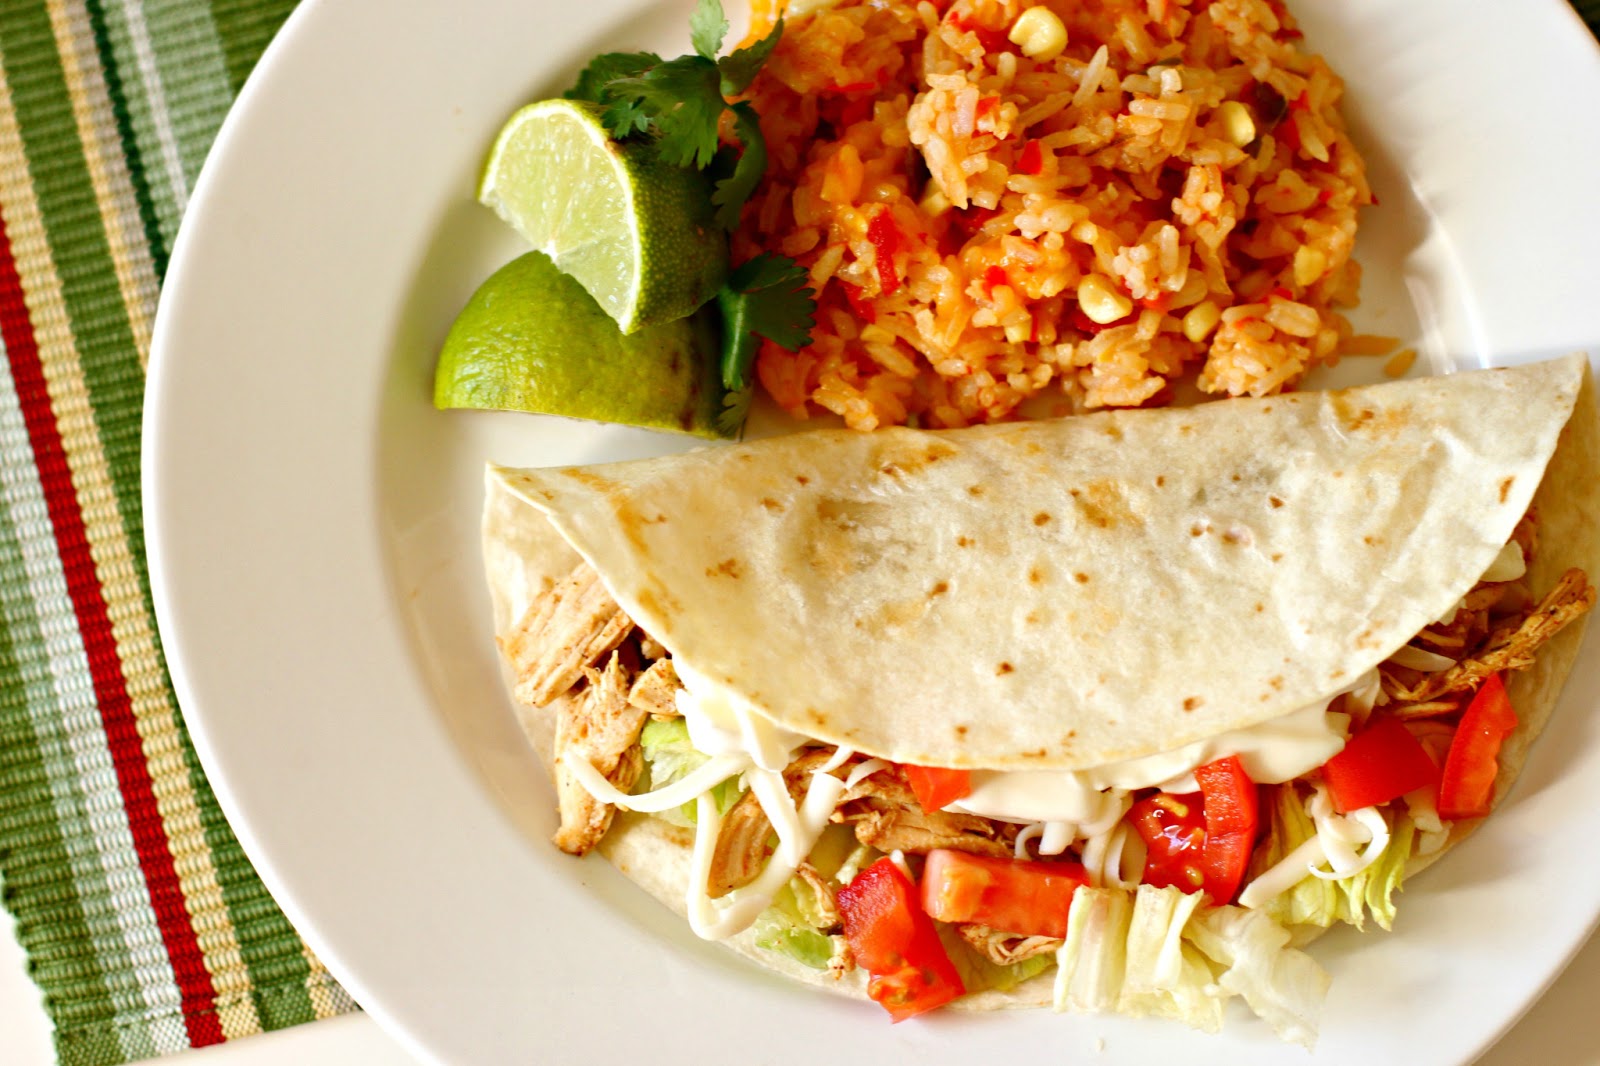 Larissa Another Day: Slow Cooker Saturday: Shredded Chicken Tacos